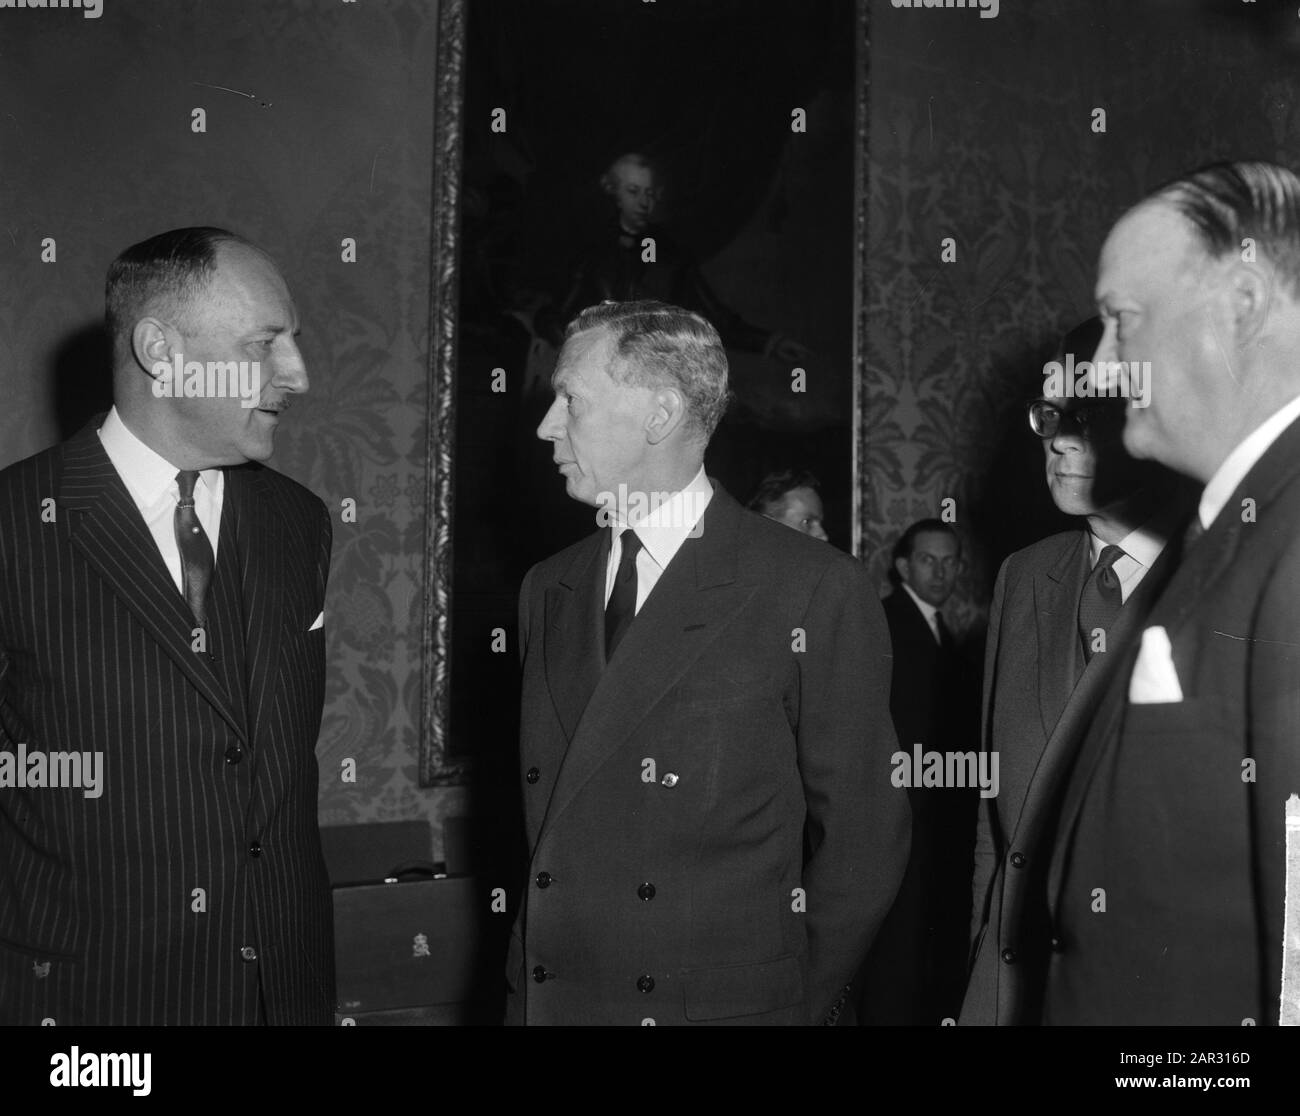 Ministersconference of the West European Union in The Hague. Vlnr. Luns, M. Couve de Murville and Rab Butler Date: 25 October 1963 Location: The Hague, Zuid-Holland Keywords: conferences, ministers Personal name: Butler, R.A., Couve de Murville, Maurice, Luns, Joseph Stock Photo